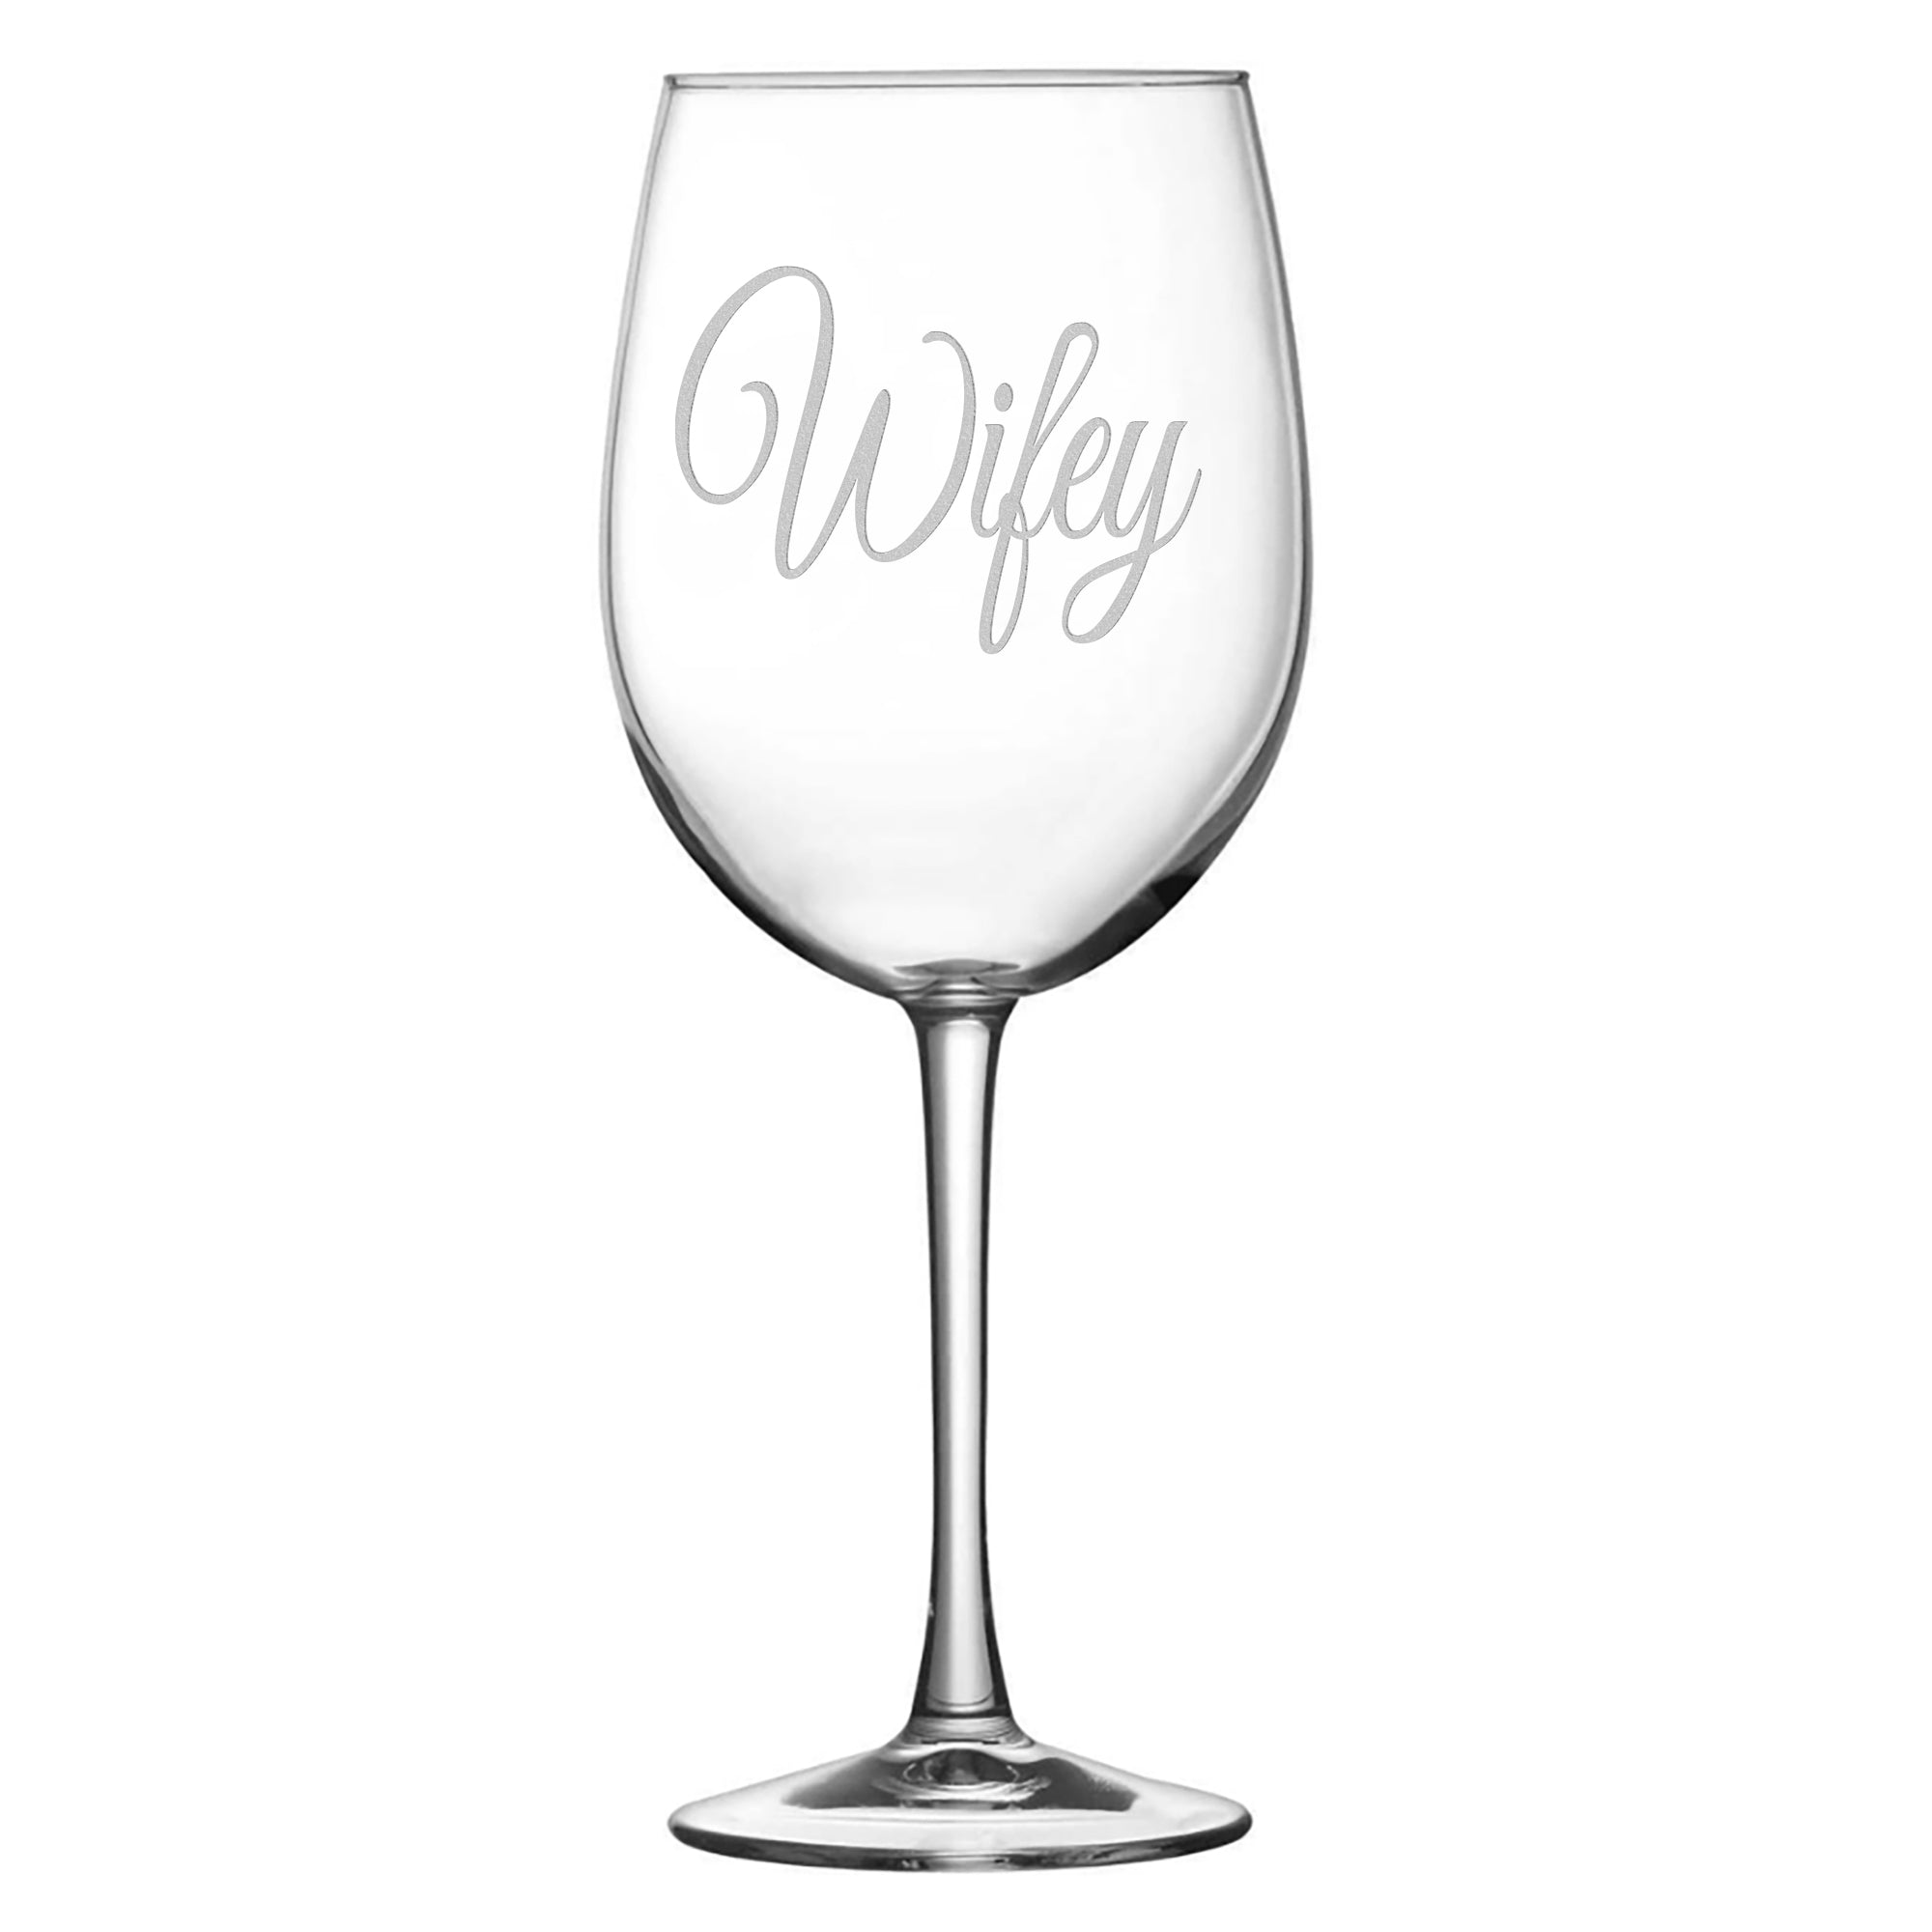 Integrity Bottles, Wifey, Stemmed Wine Glasses, Handmade, Handblown, Hand Etched Gifts, Sand Carved, 16oz